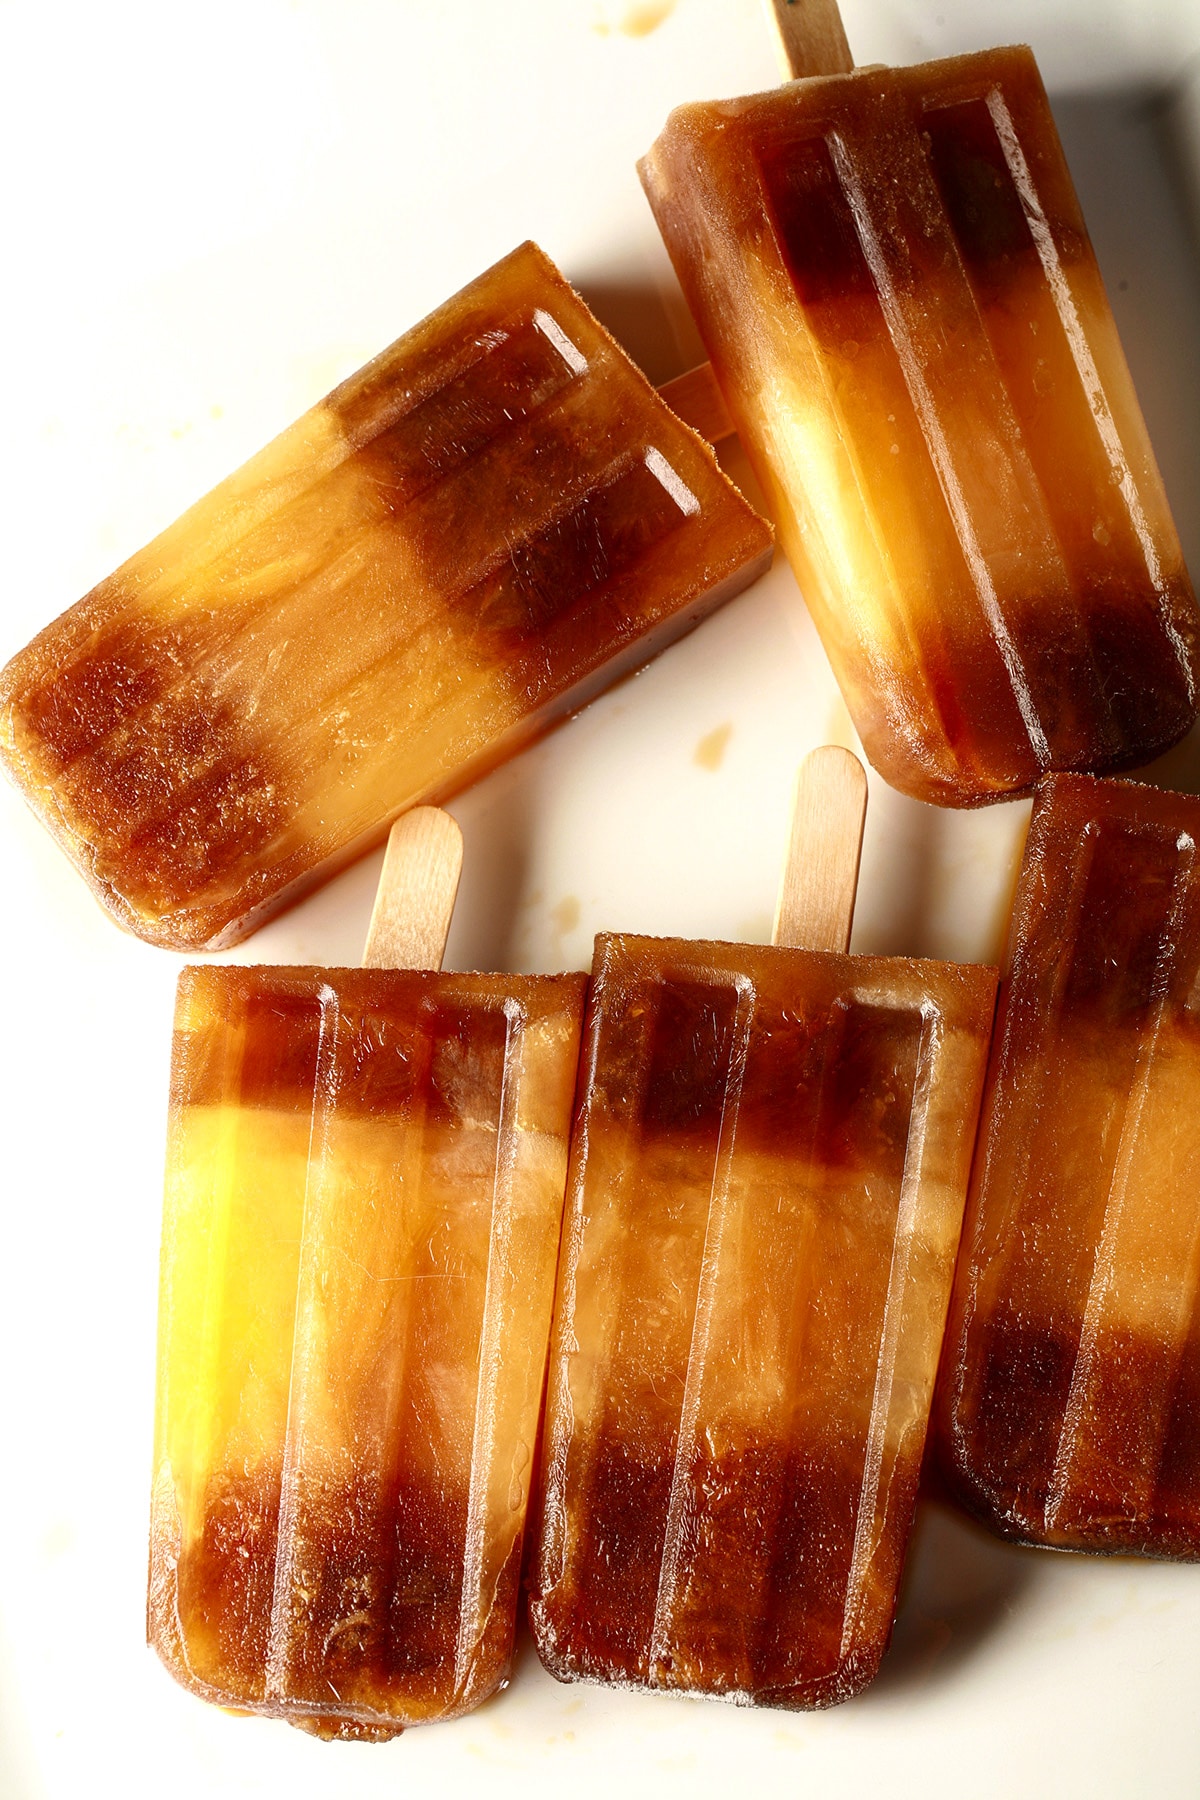 Several "Space Shuttle" popsicles - frozen root beer popsicles with a stripe of orange soda in the middle - are laid out on a white plate.